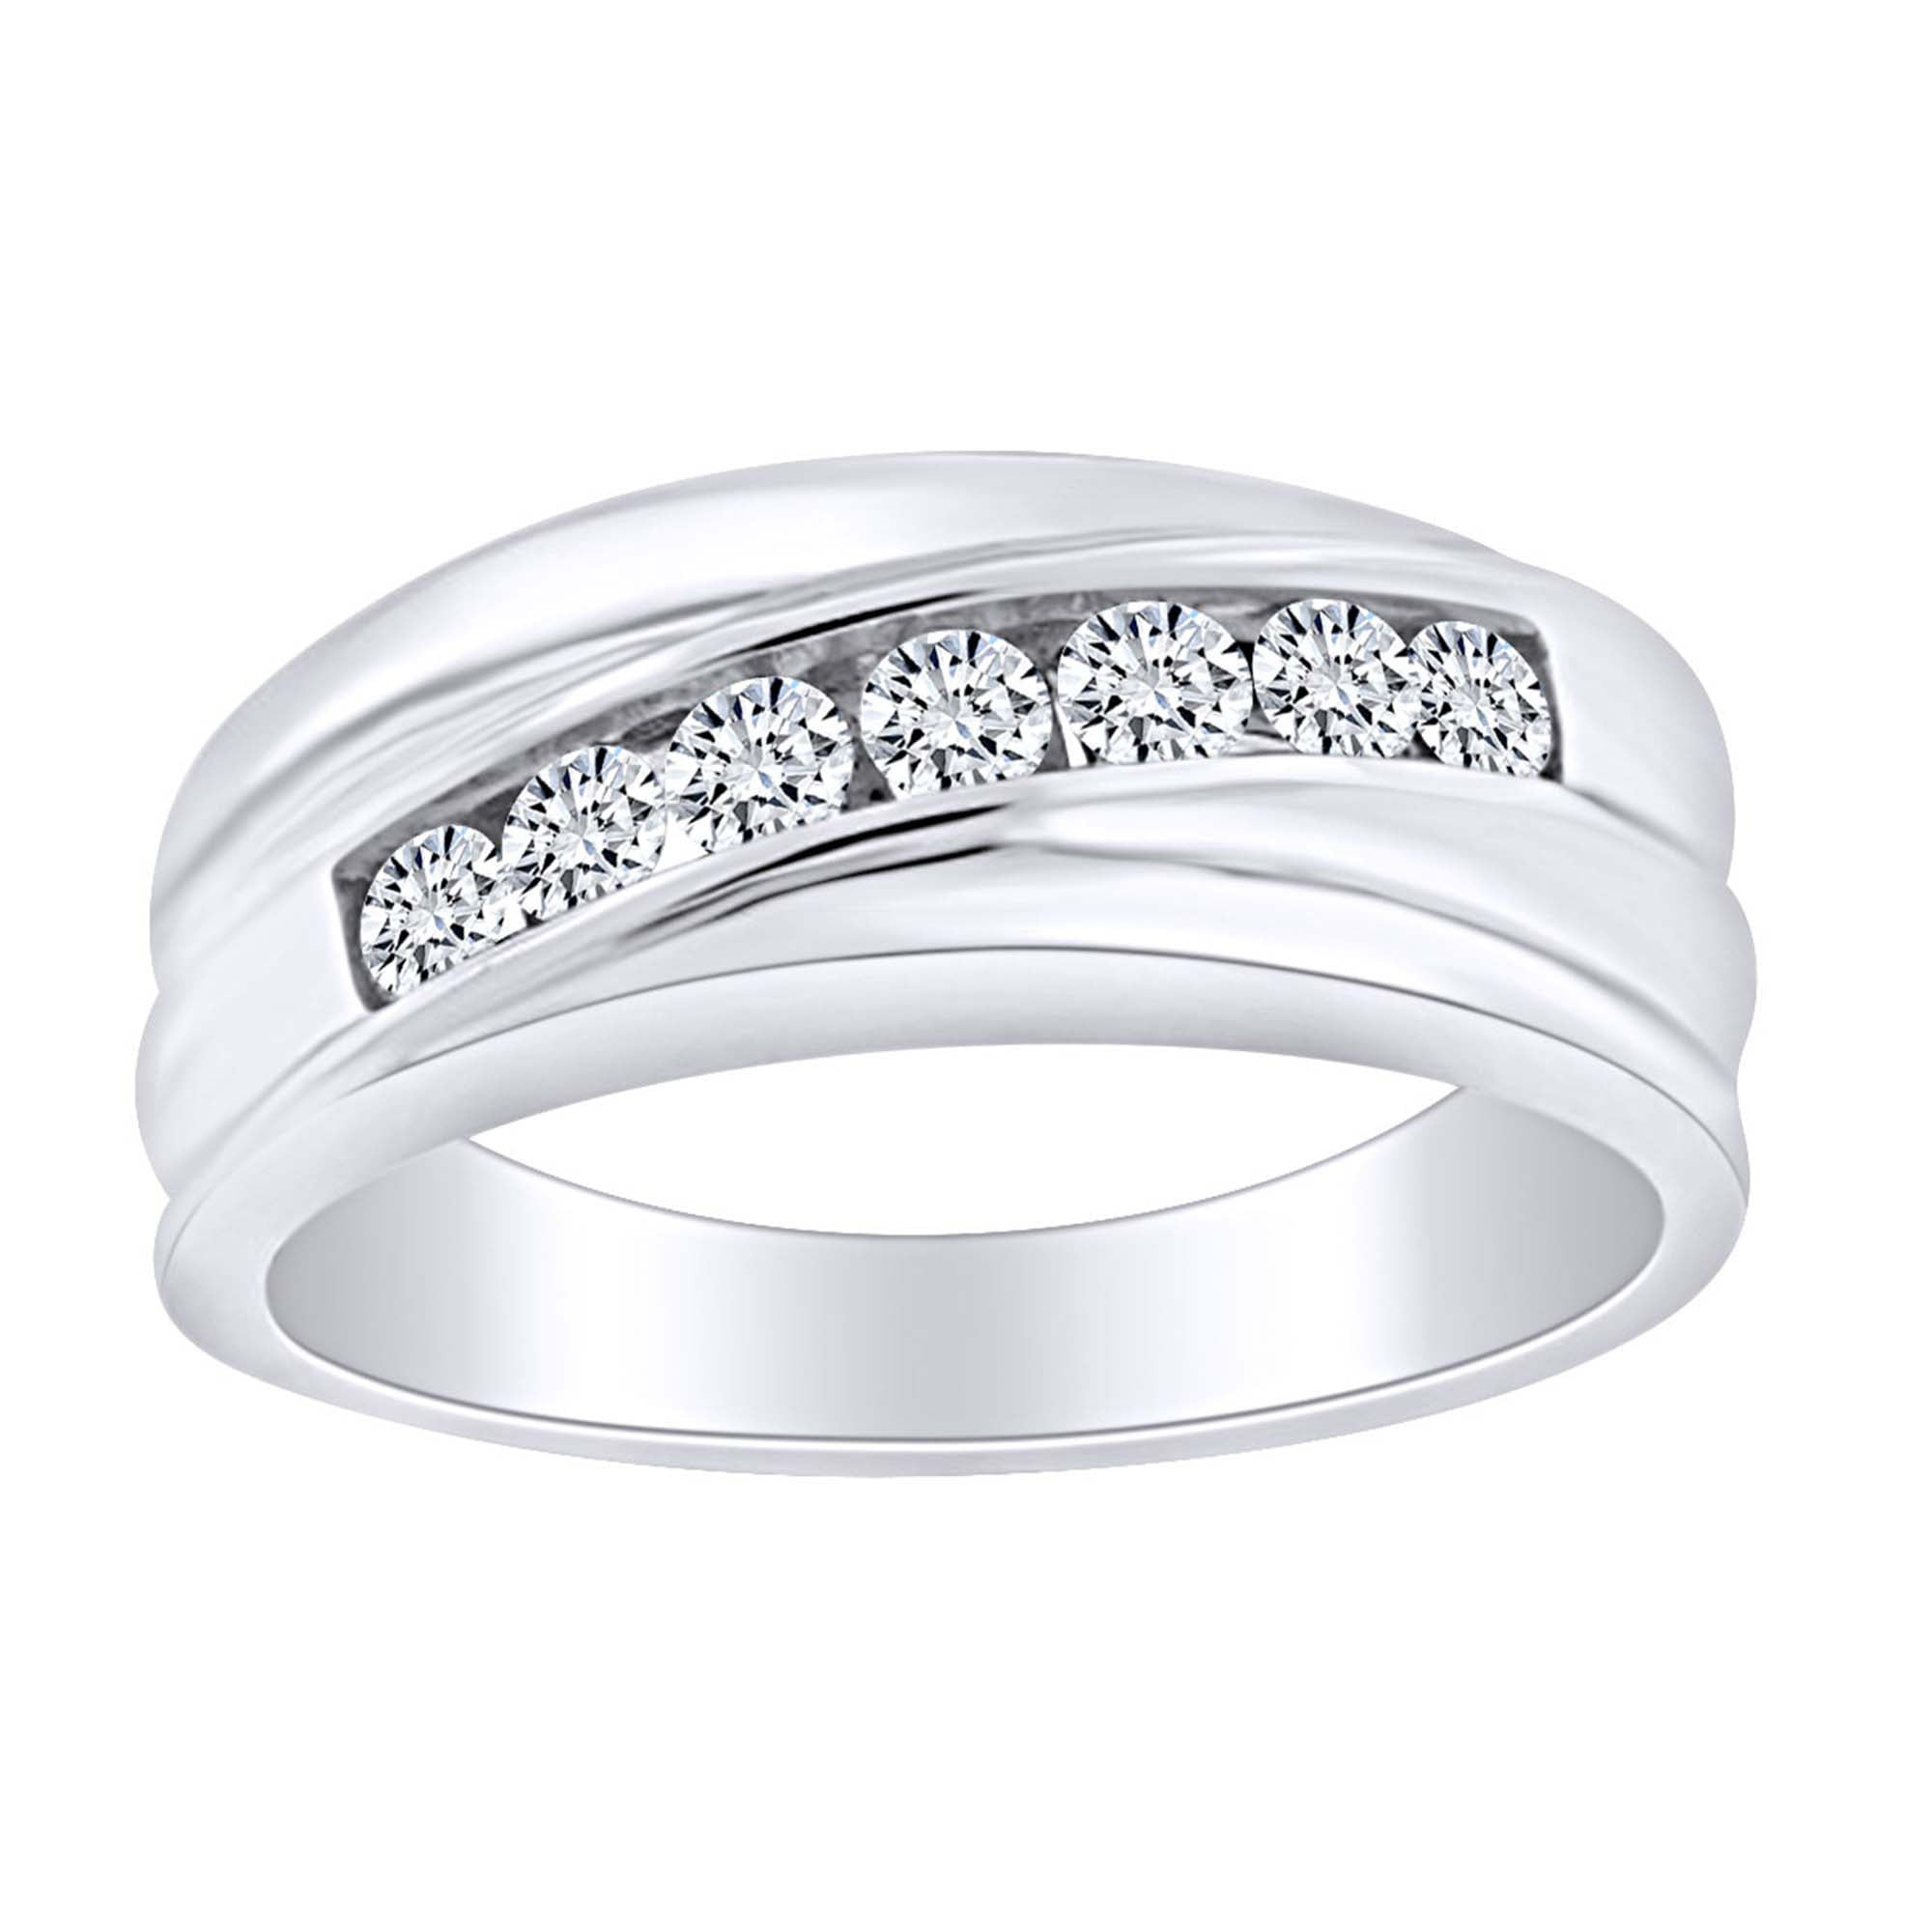 14k Solid White Gold Wedding Band 0.50 ct Round Cut Channel Set Classic Ring 